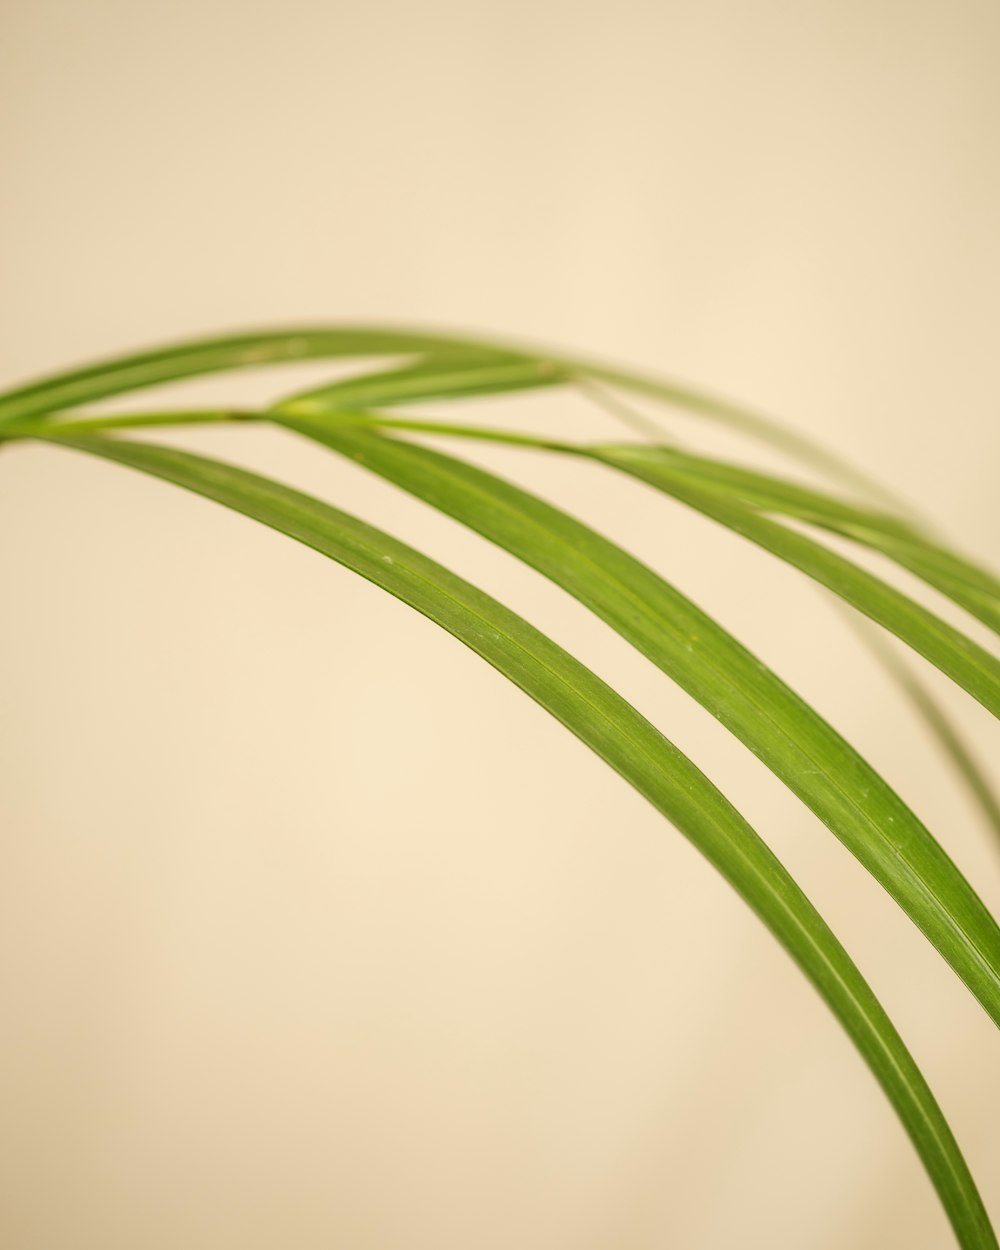 a close up of a green plant with long thin leaves